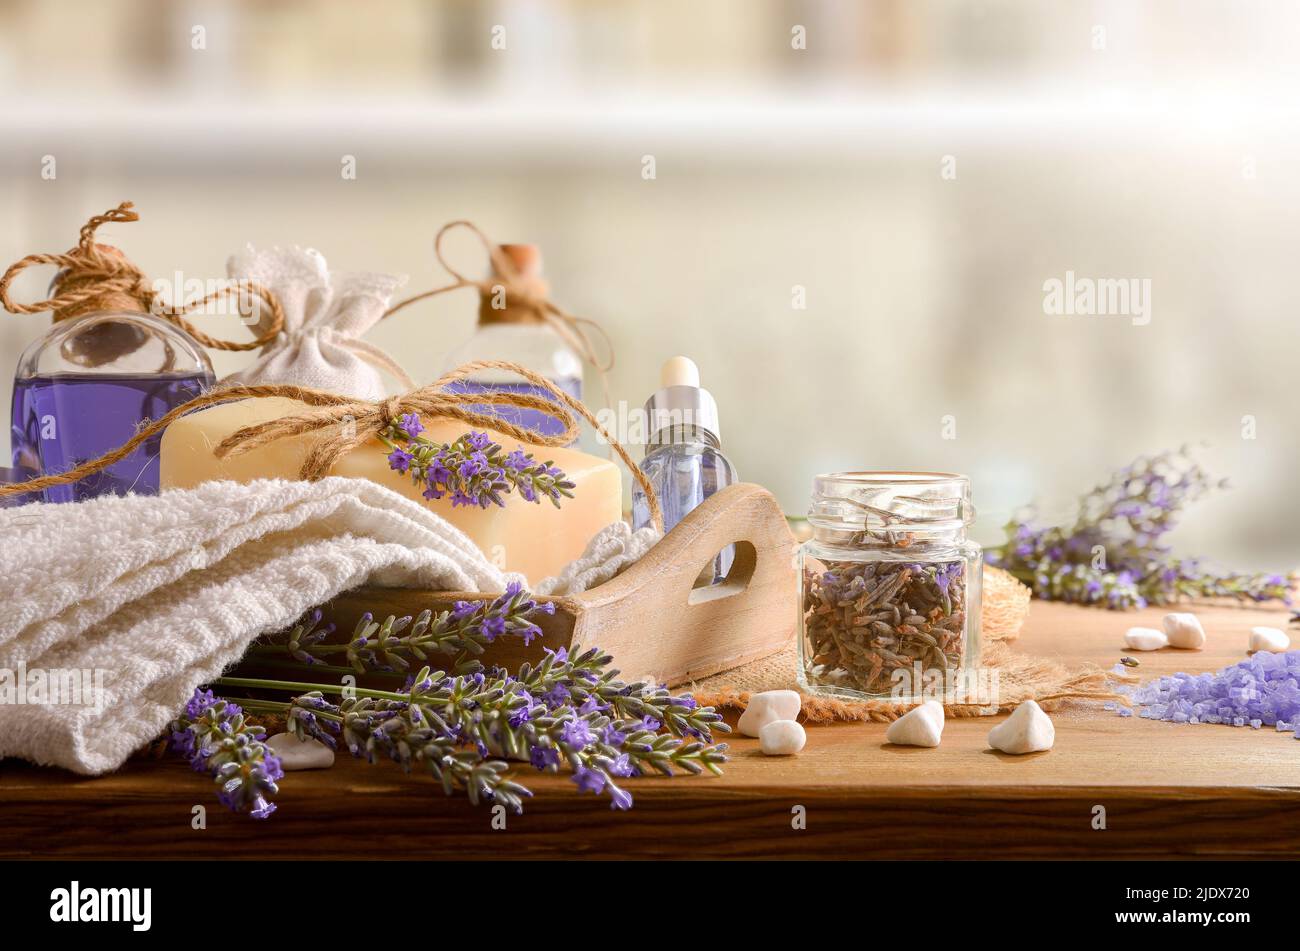 Set of natural lavender body care products on wooden table. Front view. Horizontal composition. Stock Photo